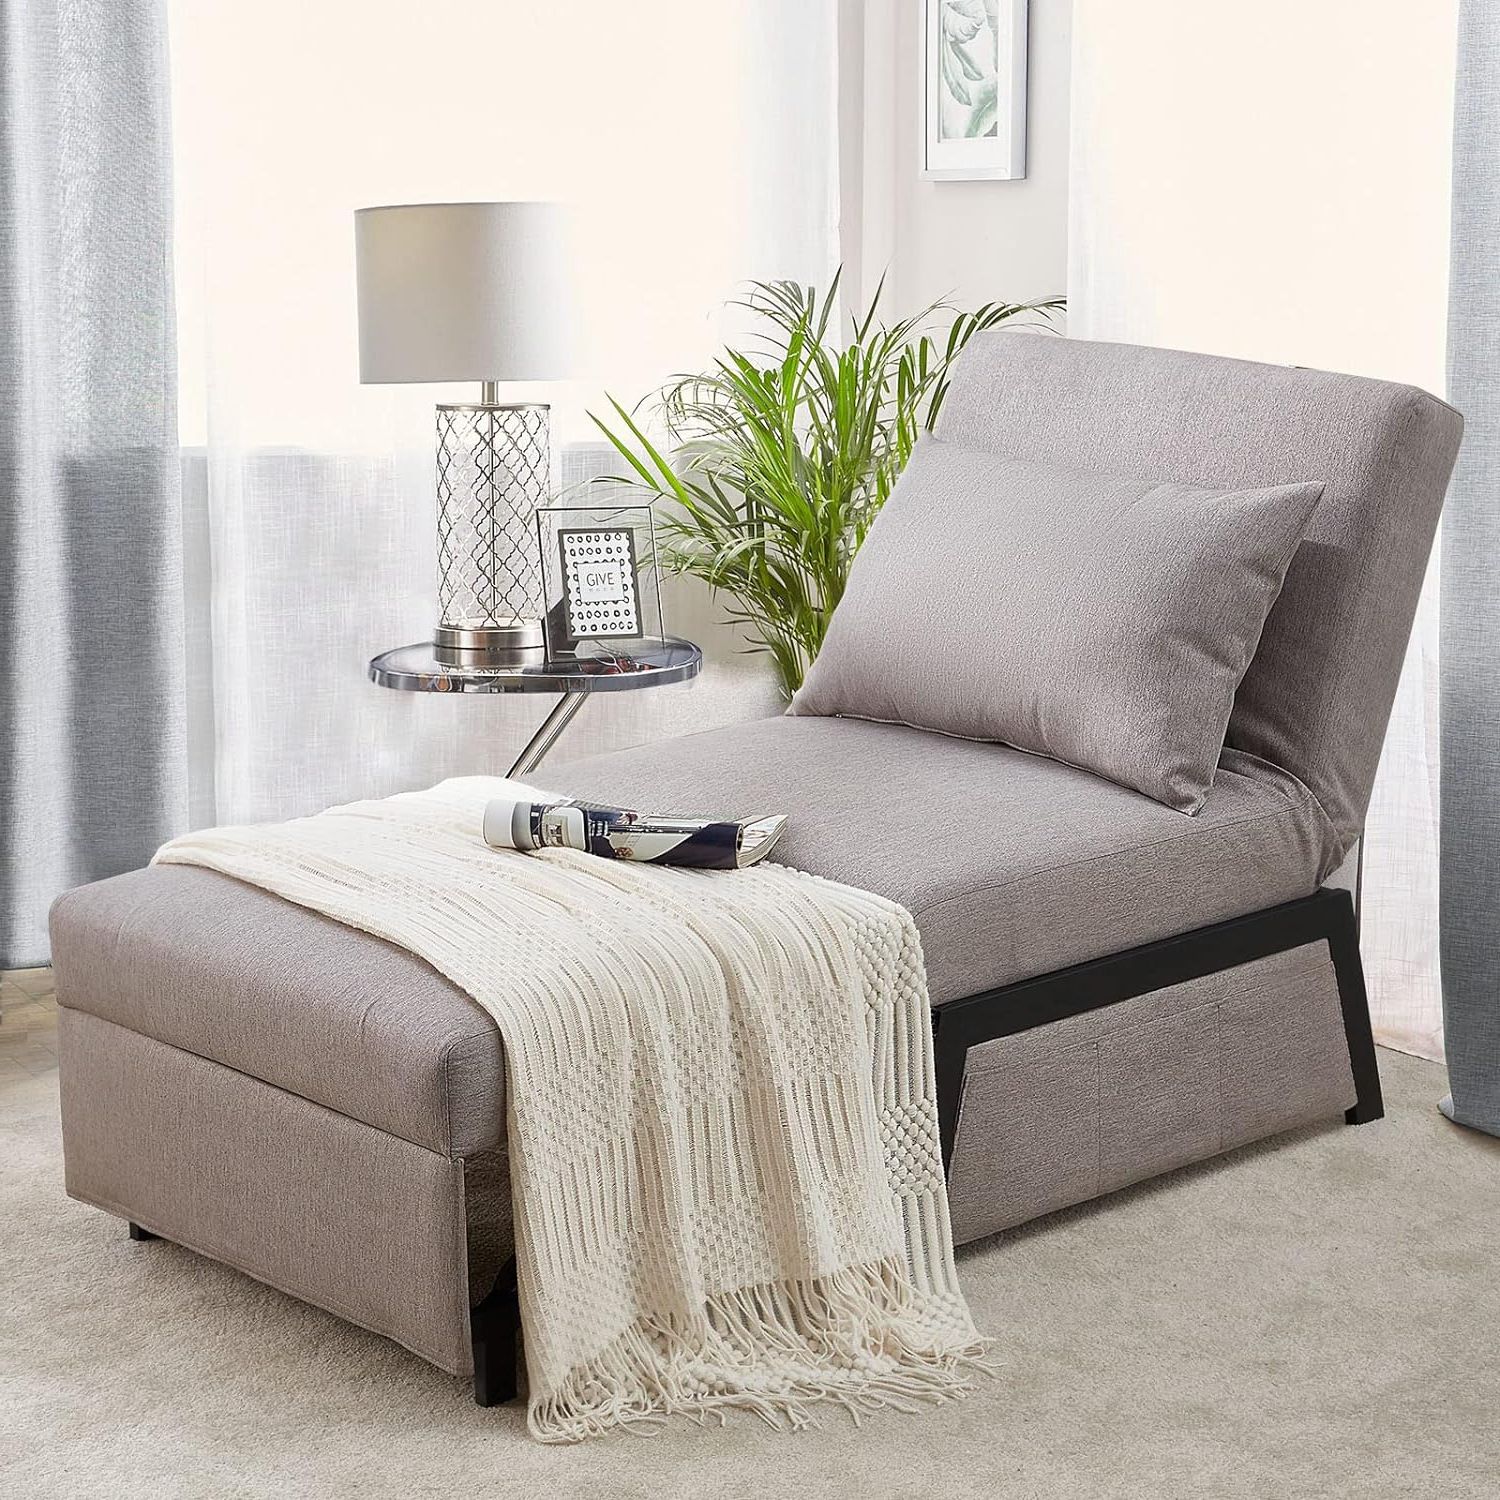 Convertible Light Gray Chair Beds Intended For Most Current Buy Yodolla 3 In 1 Convertible Chair Bed, Multi Function Sleeper Sofa (View 6 of 15)